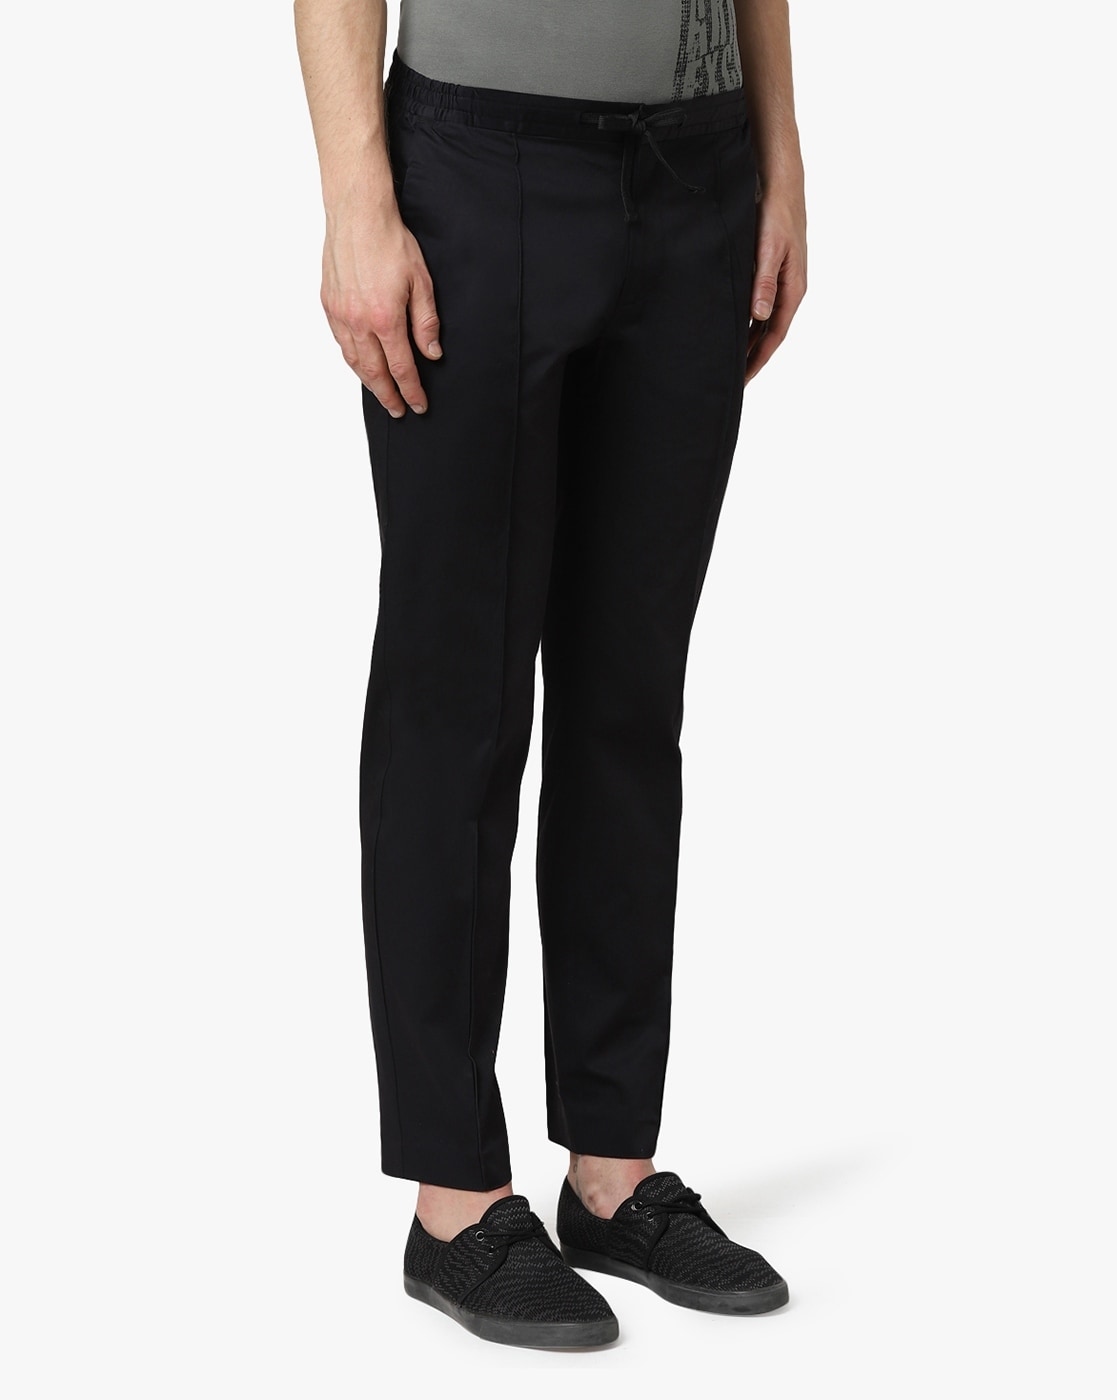 Buy Black Trousers & Pants for Men by ARMANI EXCHANGE Online 